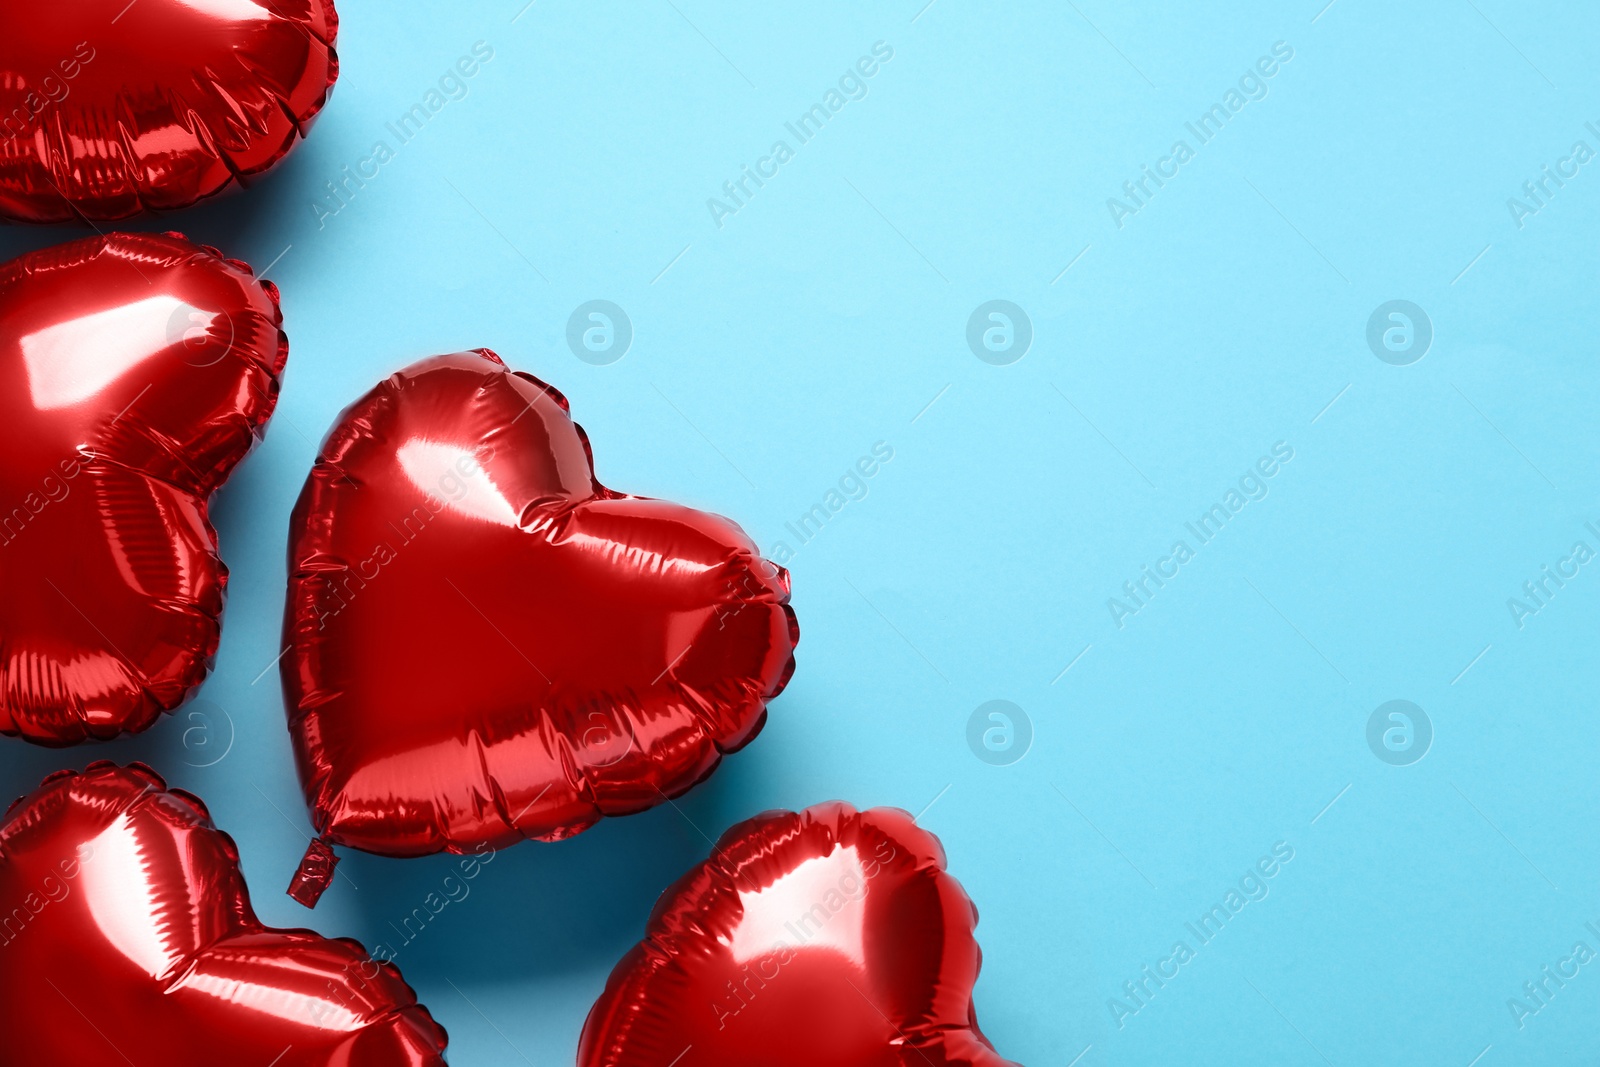 Photo of Red heart shaped balloons on light blue background, flat lay with space for text. Valentine's Day celebration